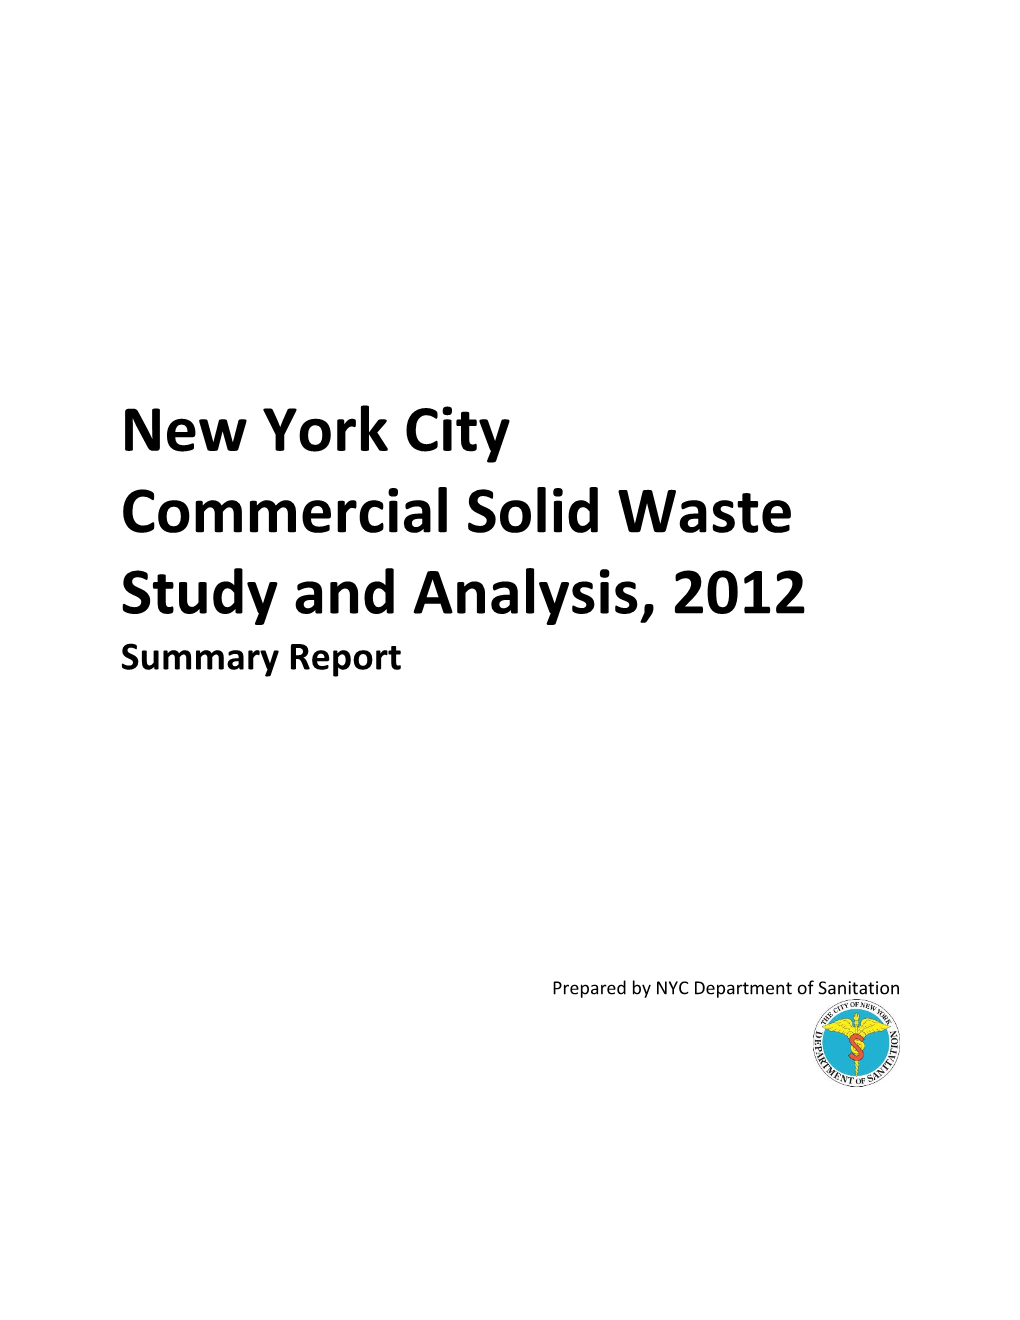 New York City Commercial Solid Waste Study and Analysis, 2012 Summary Report